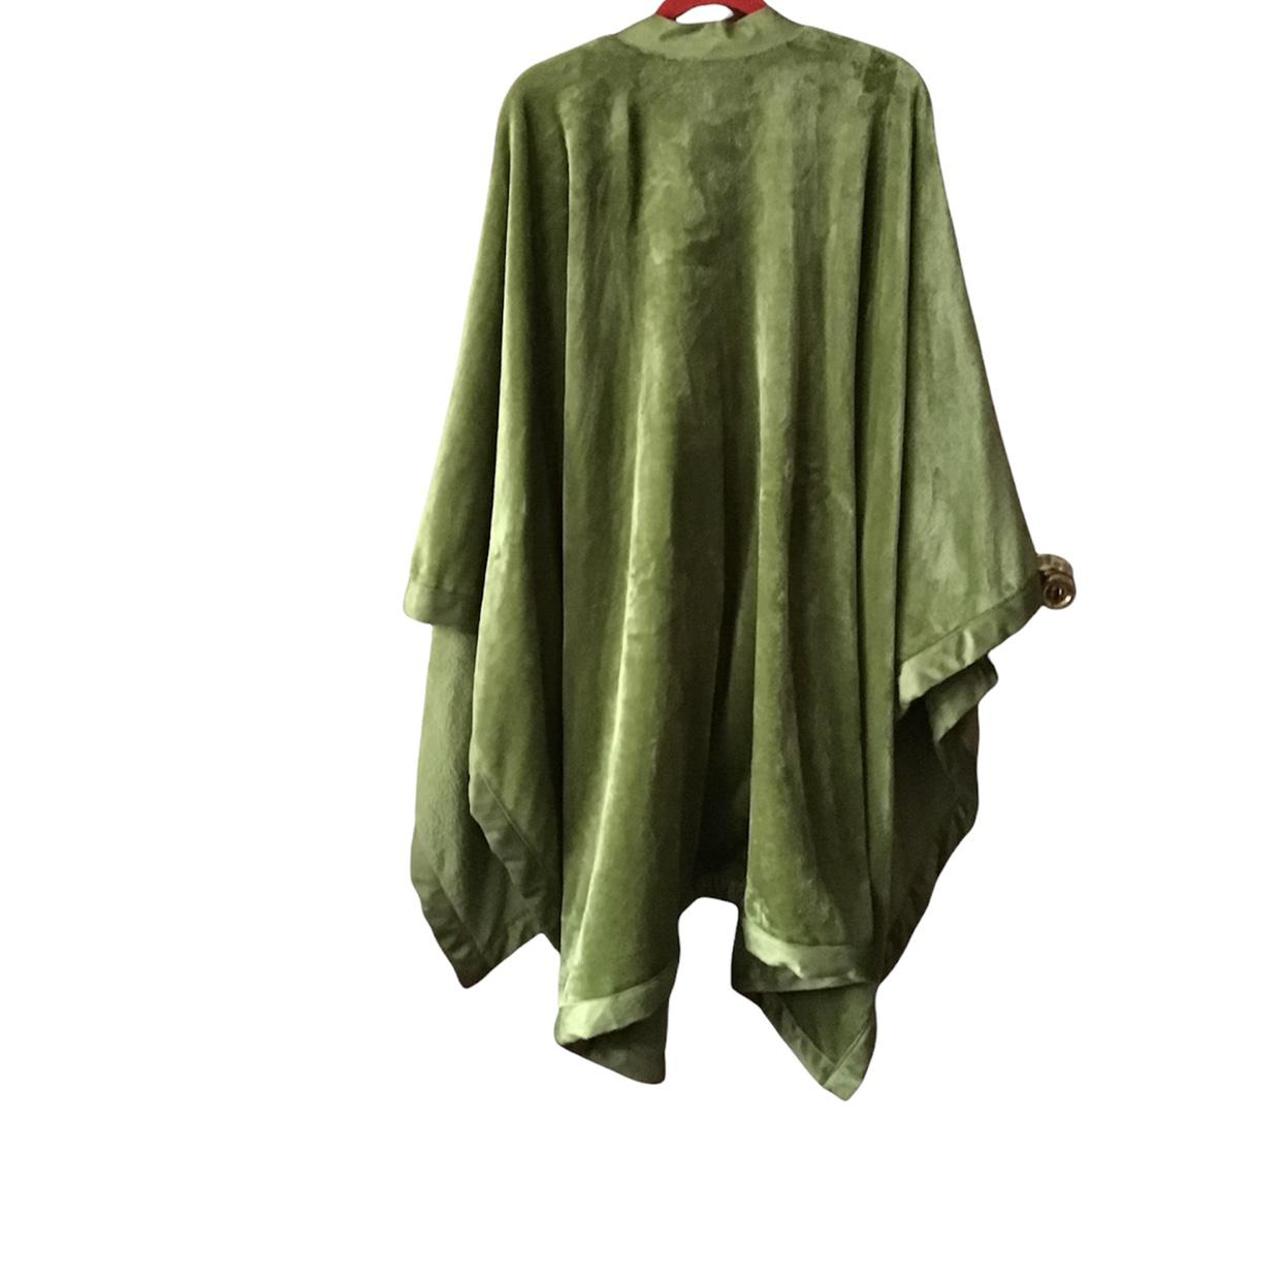 Product Image 2 - Christmas green cozy cape wrap.